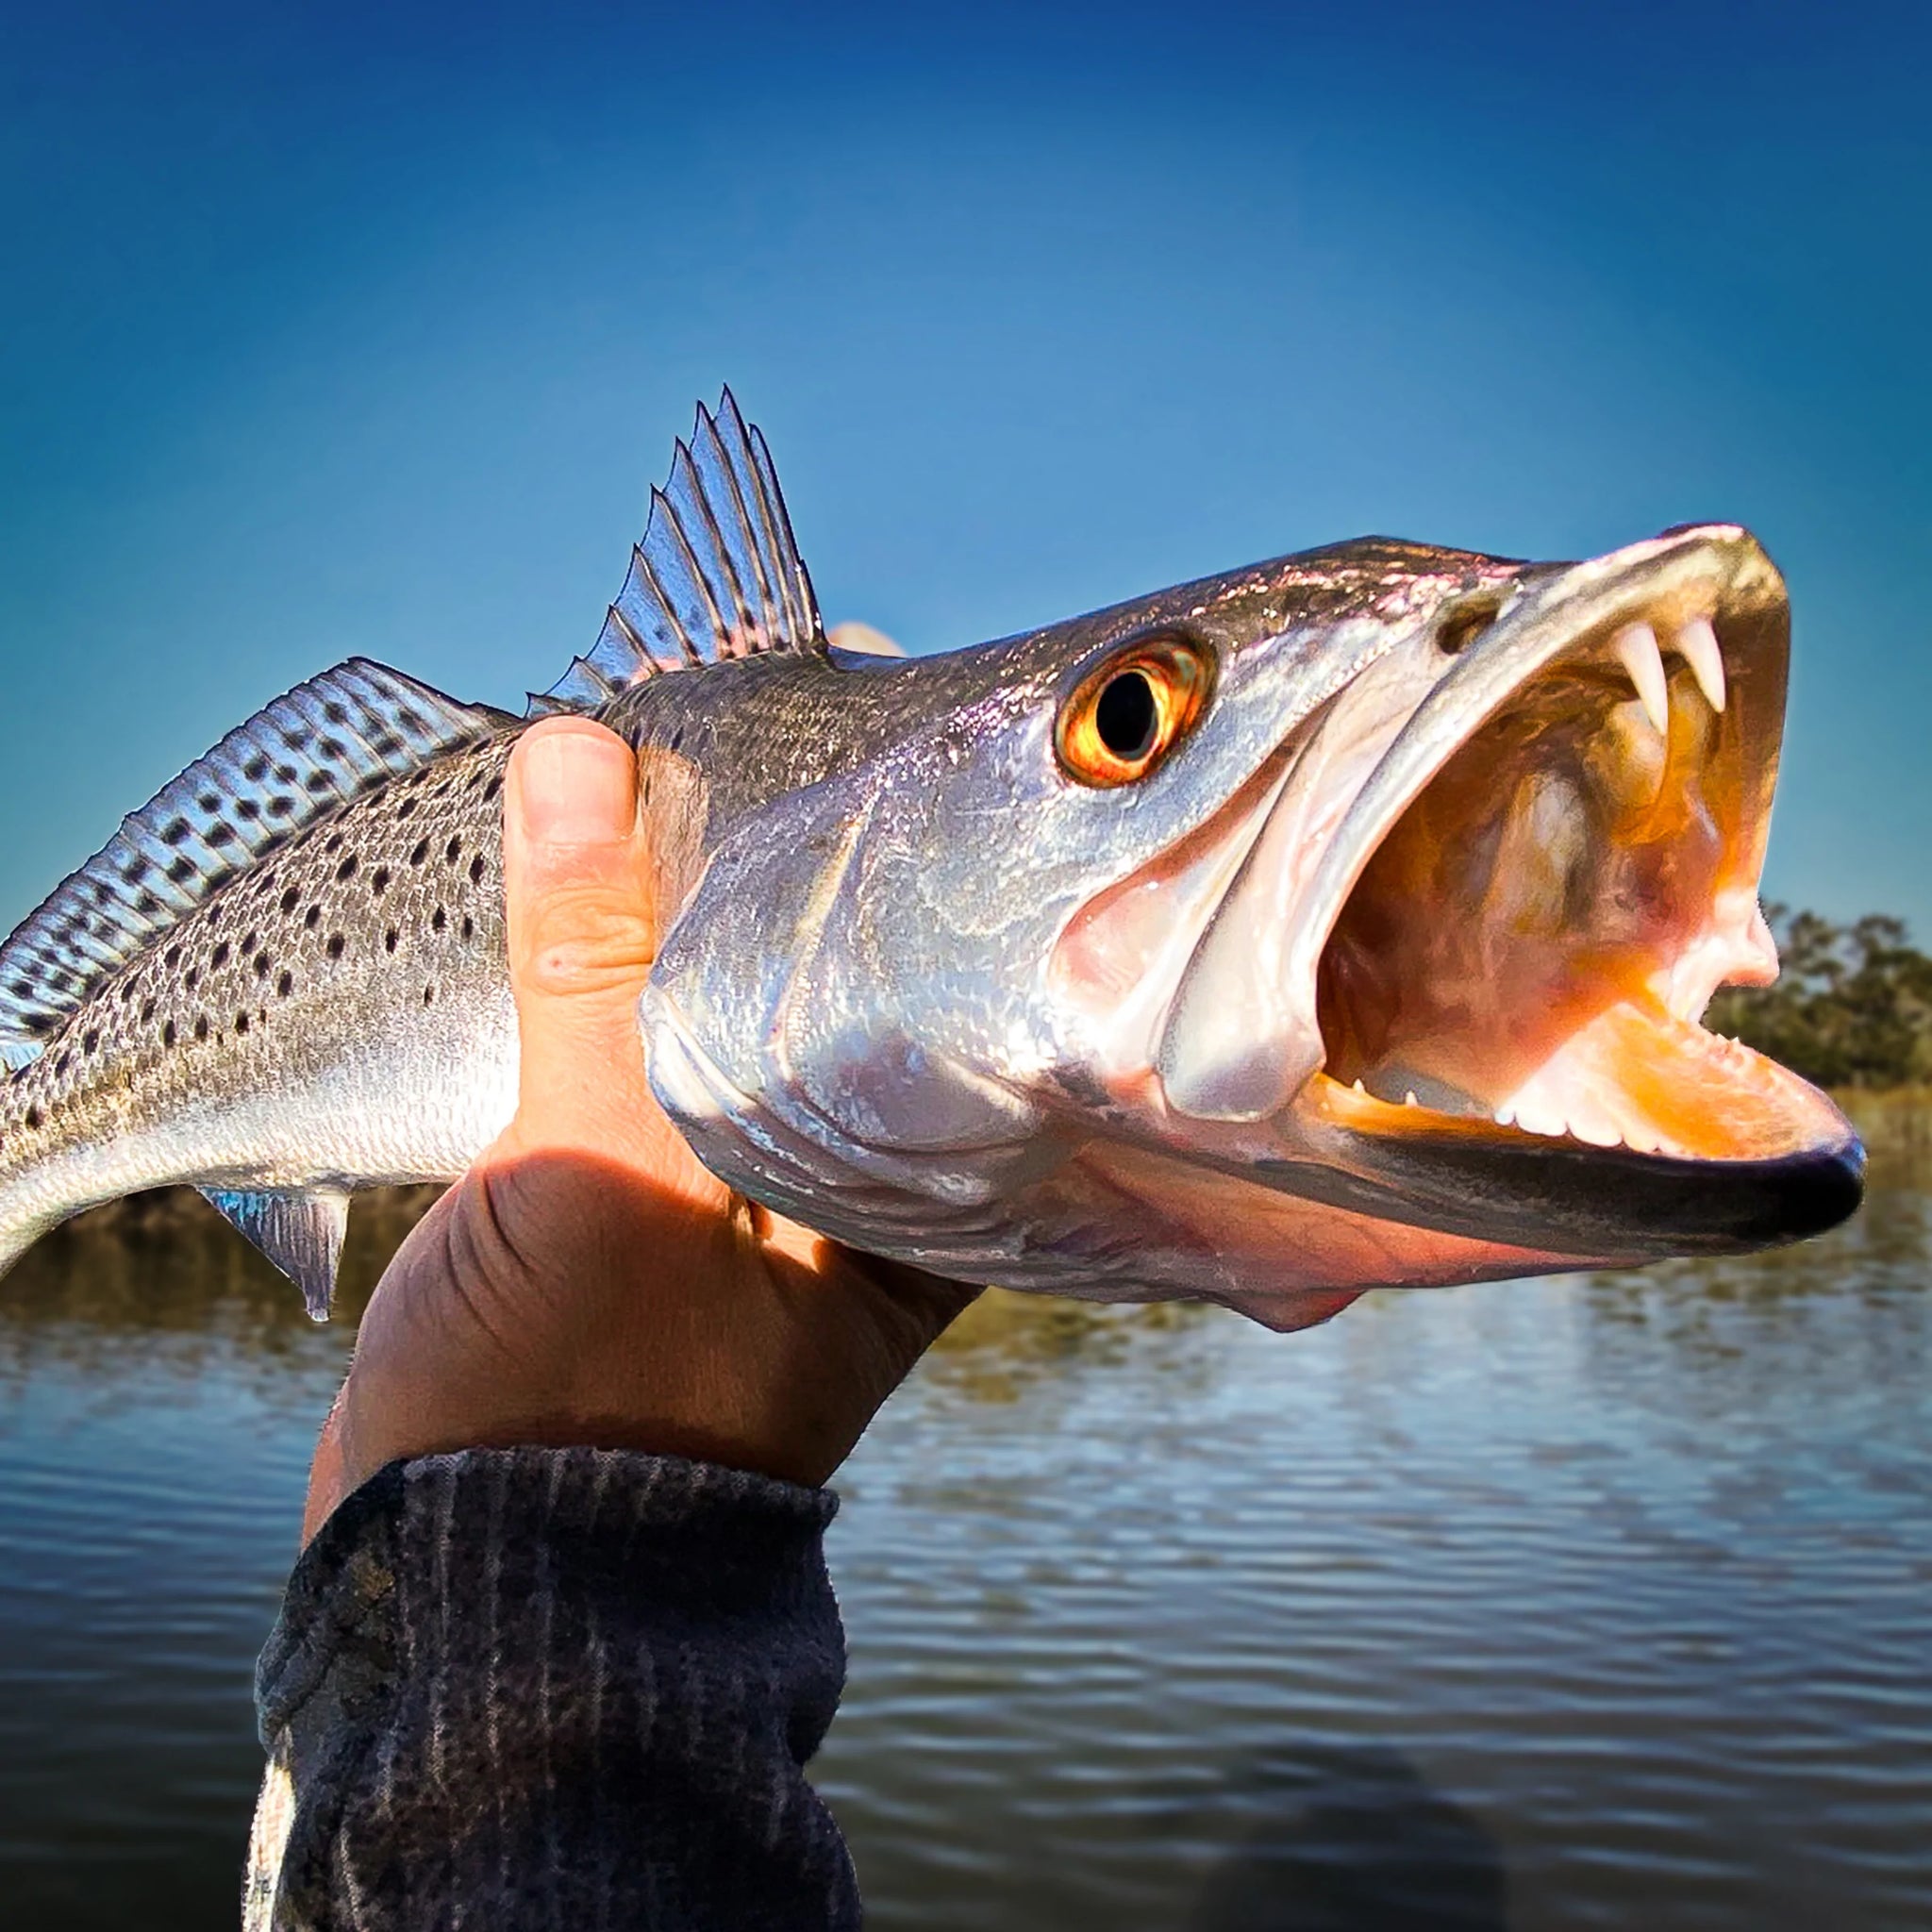 4 Tips For Catching Trout & Redfish This Fall Fishing Season